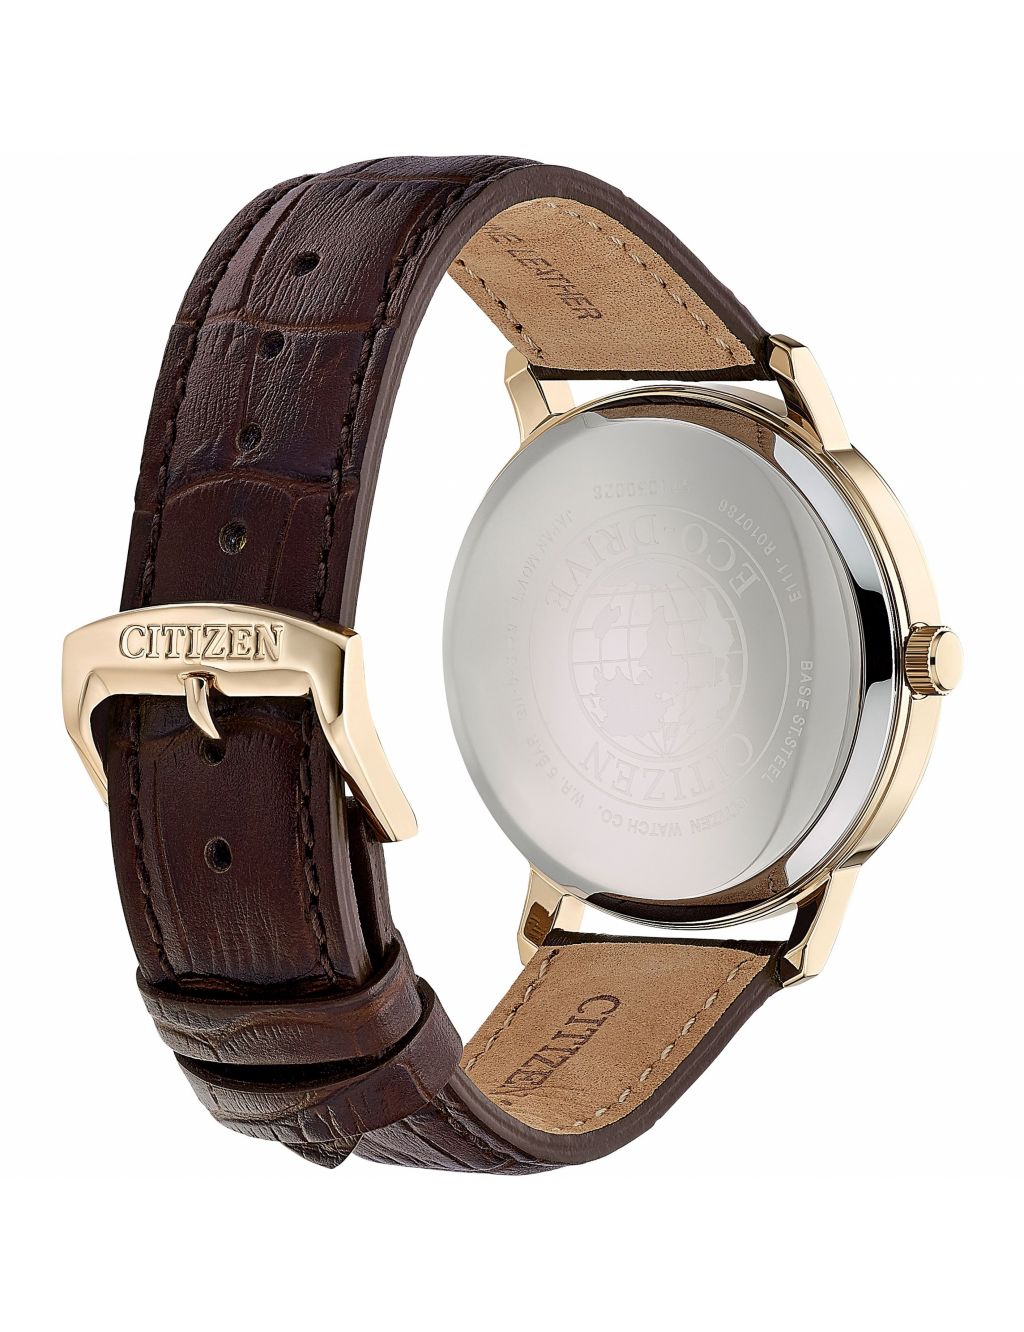 Citizen Classic  Leather Watch image 2